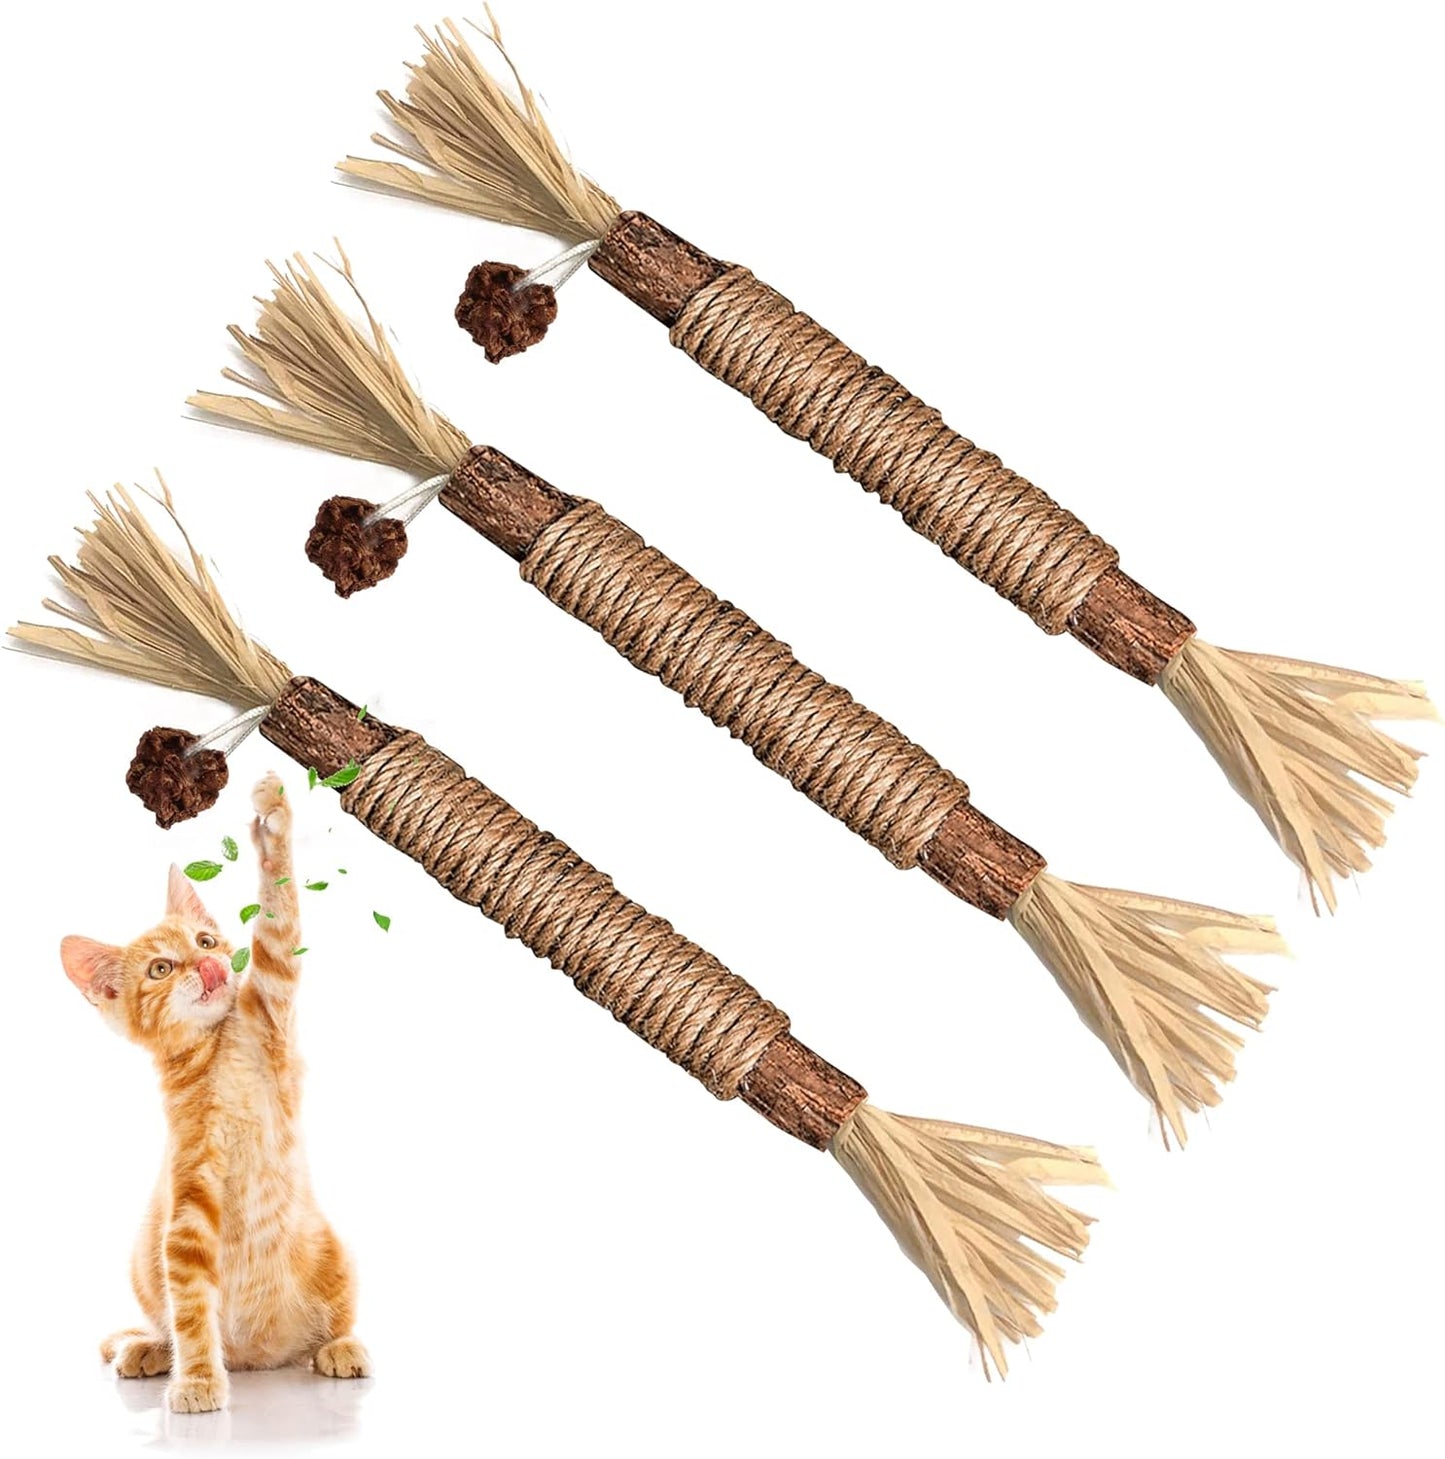 3 Pack Silvervine Cat Toy, Silvervine Sticks Cat Toys for Indoor Cats, Cat & Kitten Chew Toys for Aggressive Chewers, Cat Dental Toy for Kitten Teeth Cleaning, Matatabi Silvervine for Cats